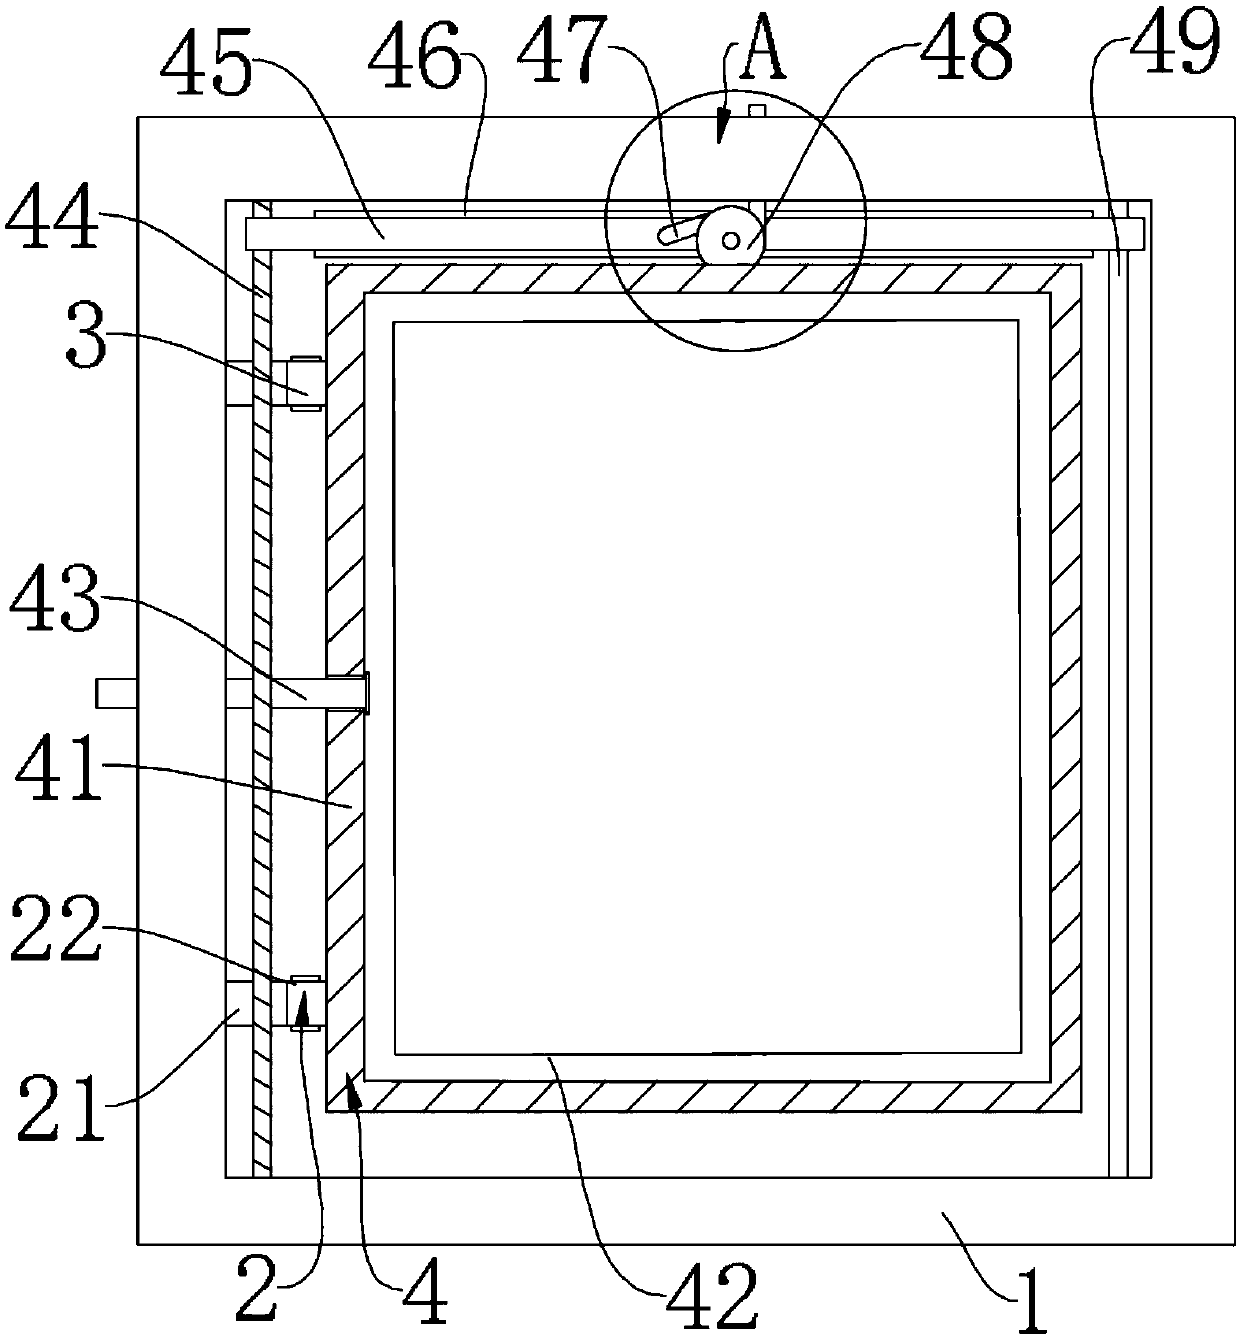 Secondary sample mounting device for corrosion layer of lead-acid storage battery plate